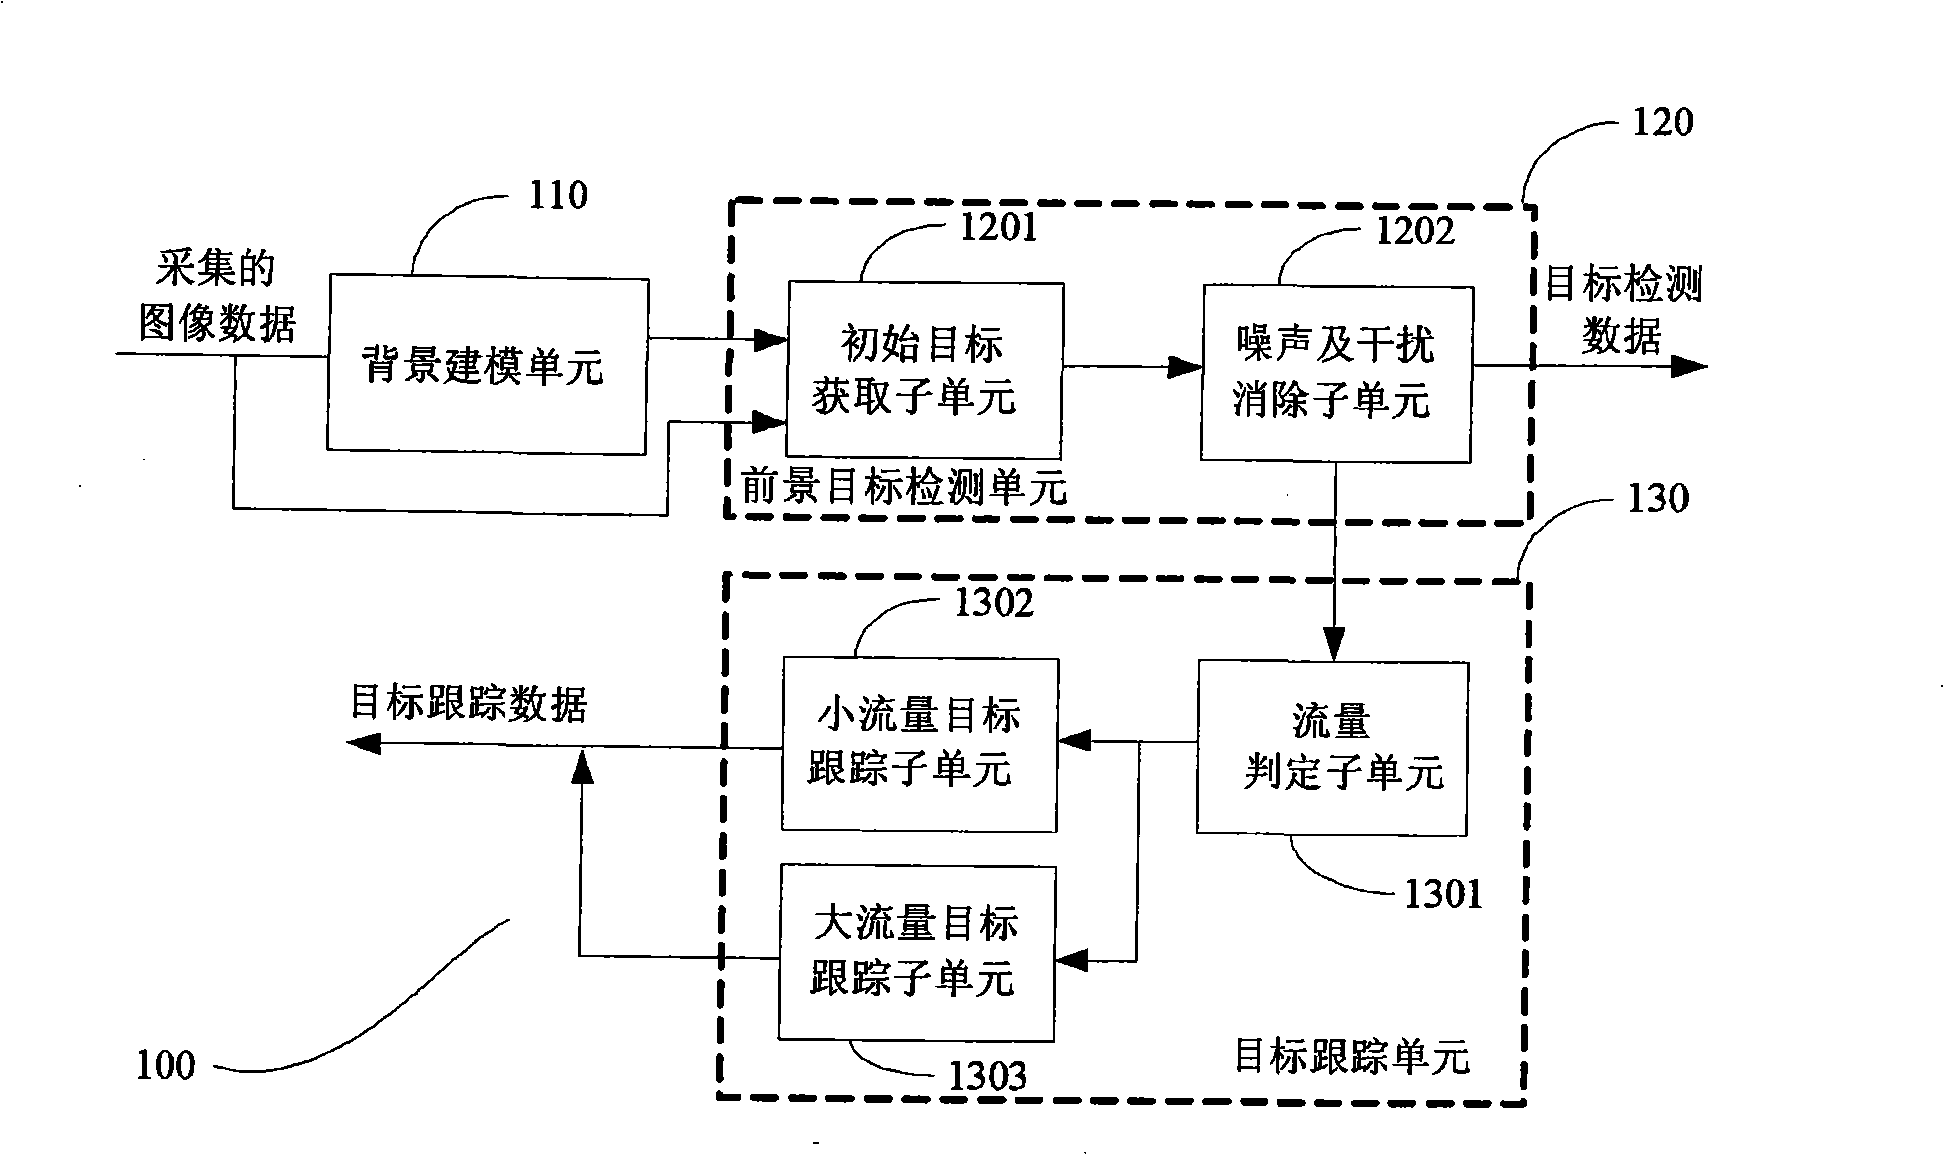 Video monitoring method and system with auxiliary objective monitoring function